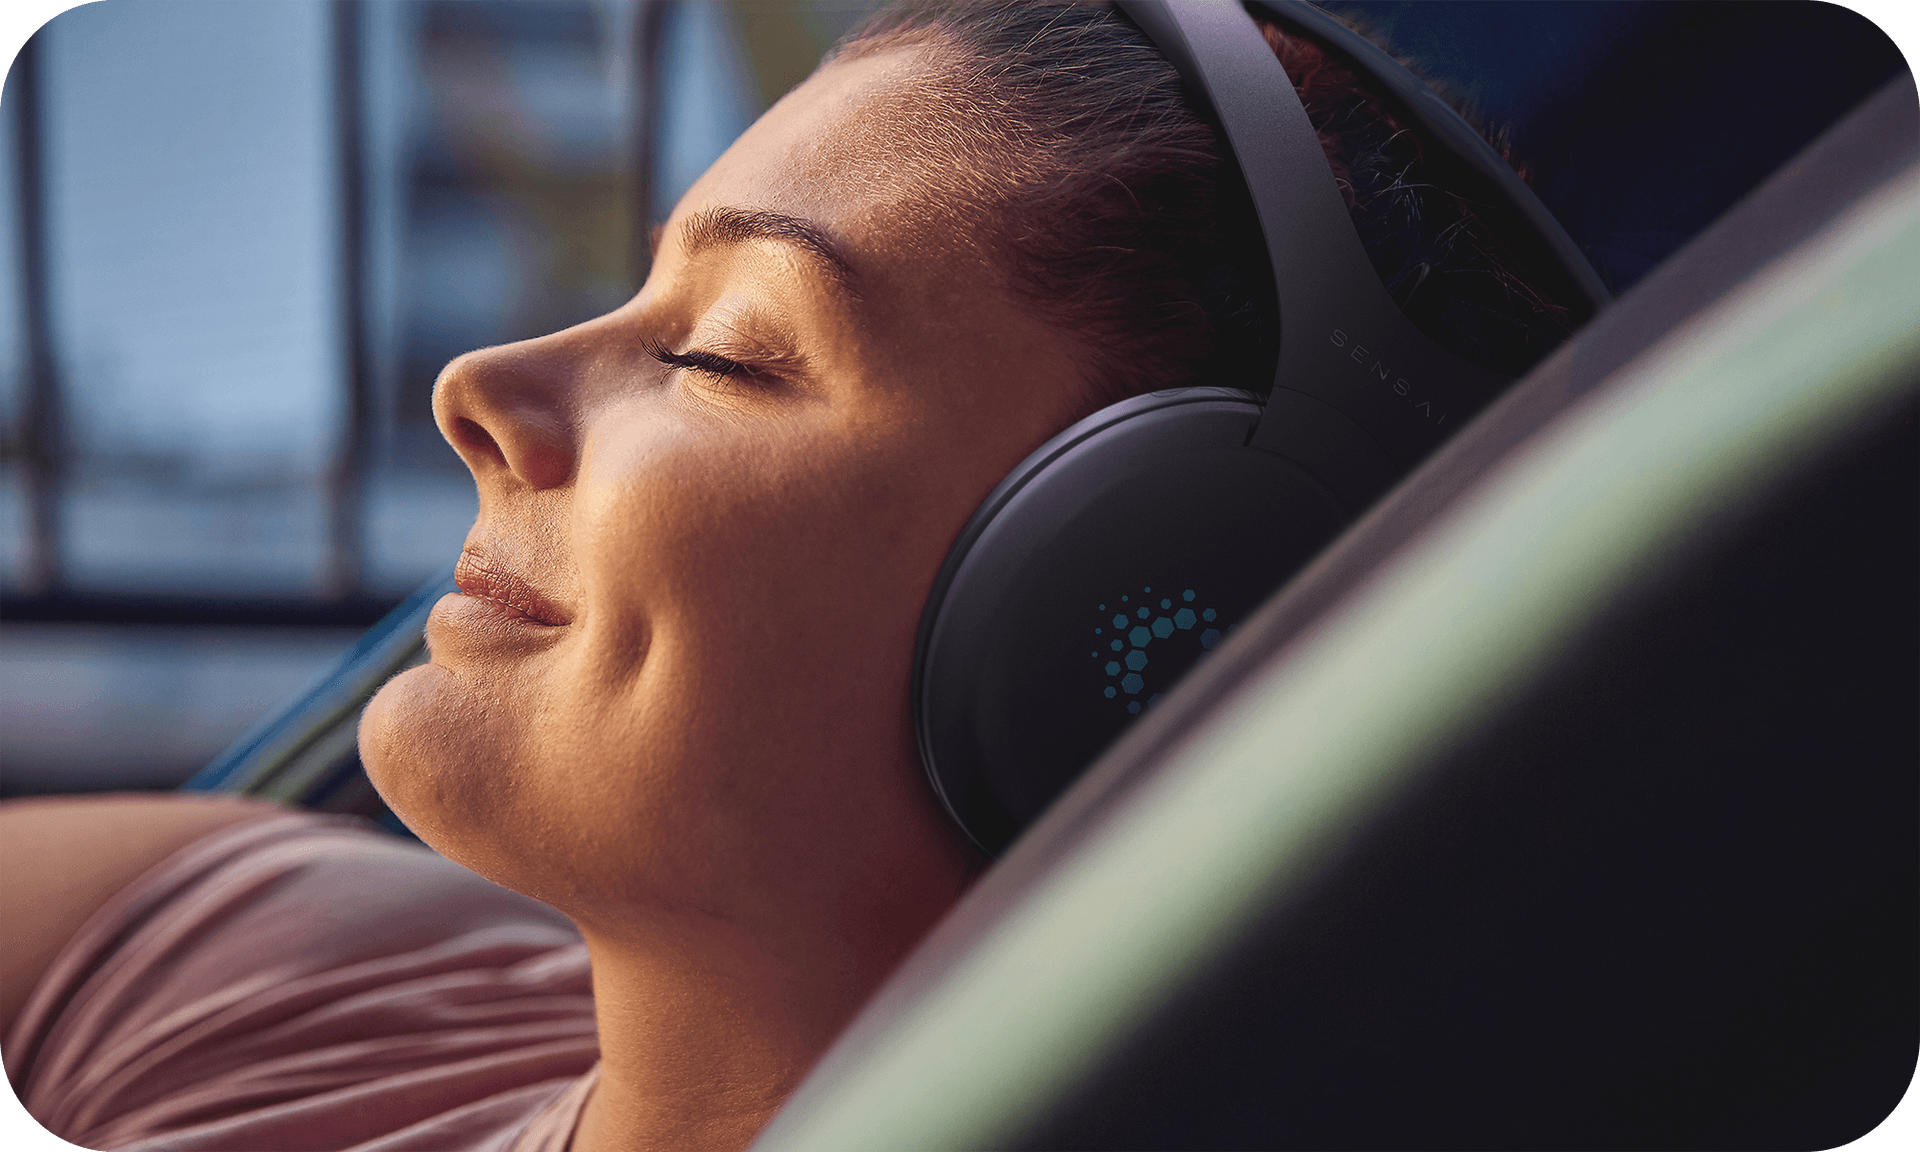 Women meditating wearing the Sens.ai headset looking very peaceful and serene